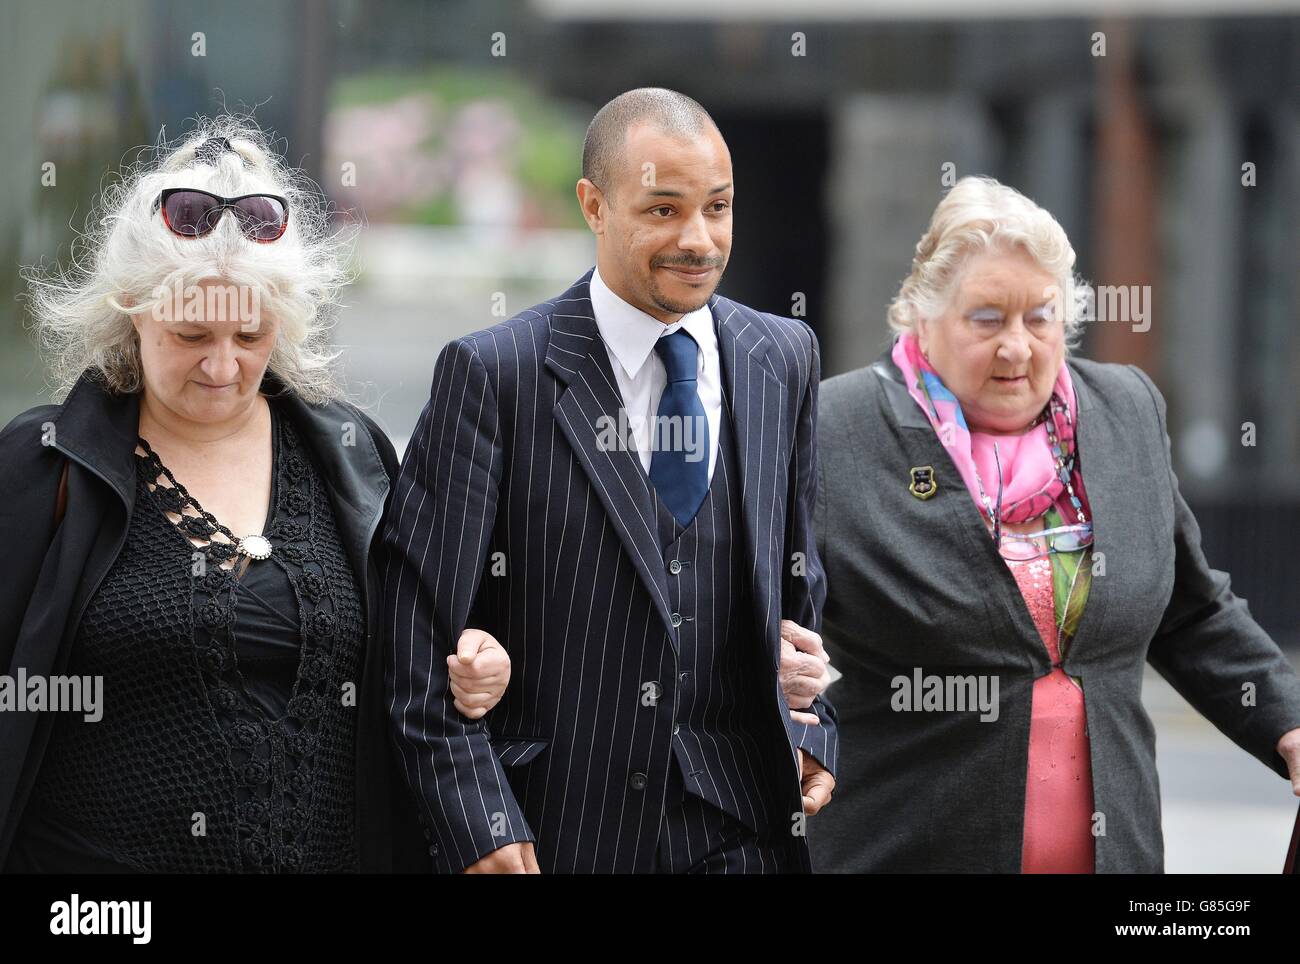 Ben Fellows arrives at the Old Bailey in London, where he is accused of perverting the course of justice by making a false statement that a public figure sexually assaulted him. Picture date: Monday July 27, 2015. The former child actor falsely claimed he was molested by Chancellor of the Exchequer Kenneth Clarke during a cash-for-questions TV sting for the Cook Report in 1994. See PA story COURTS Fellows. Photo credit should read: John Stillwell/PA Wire Stock Photo